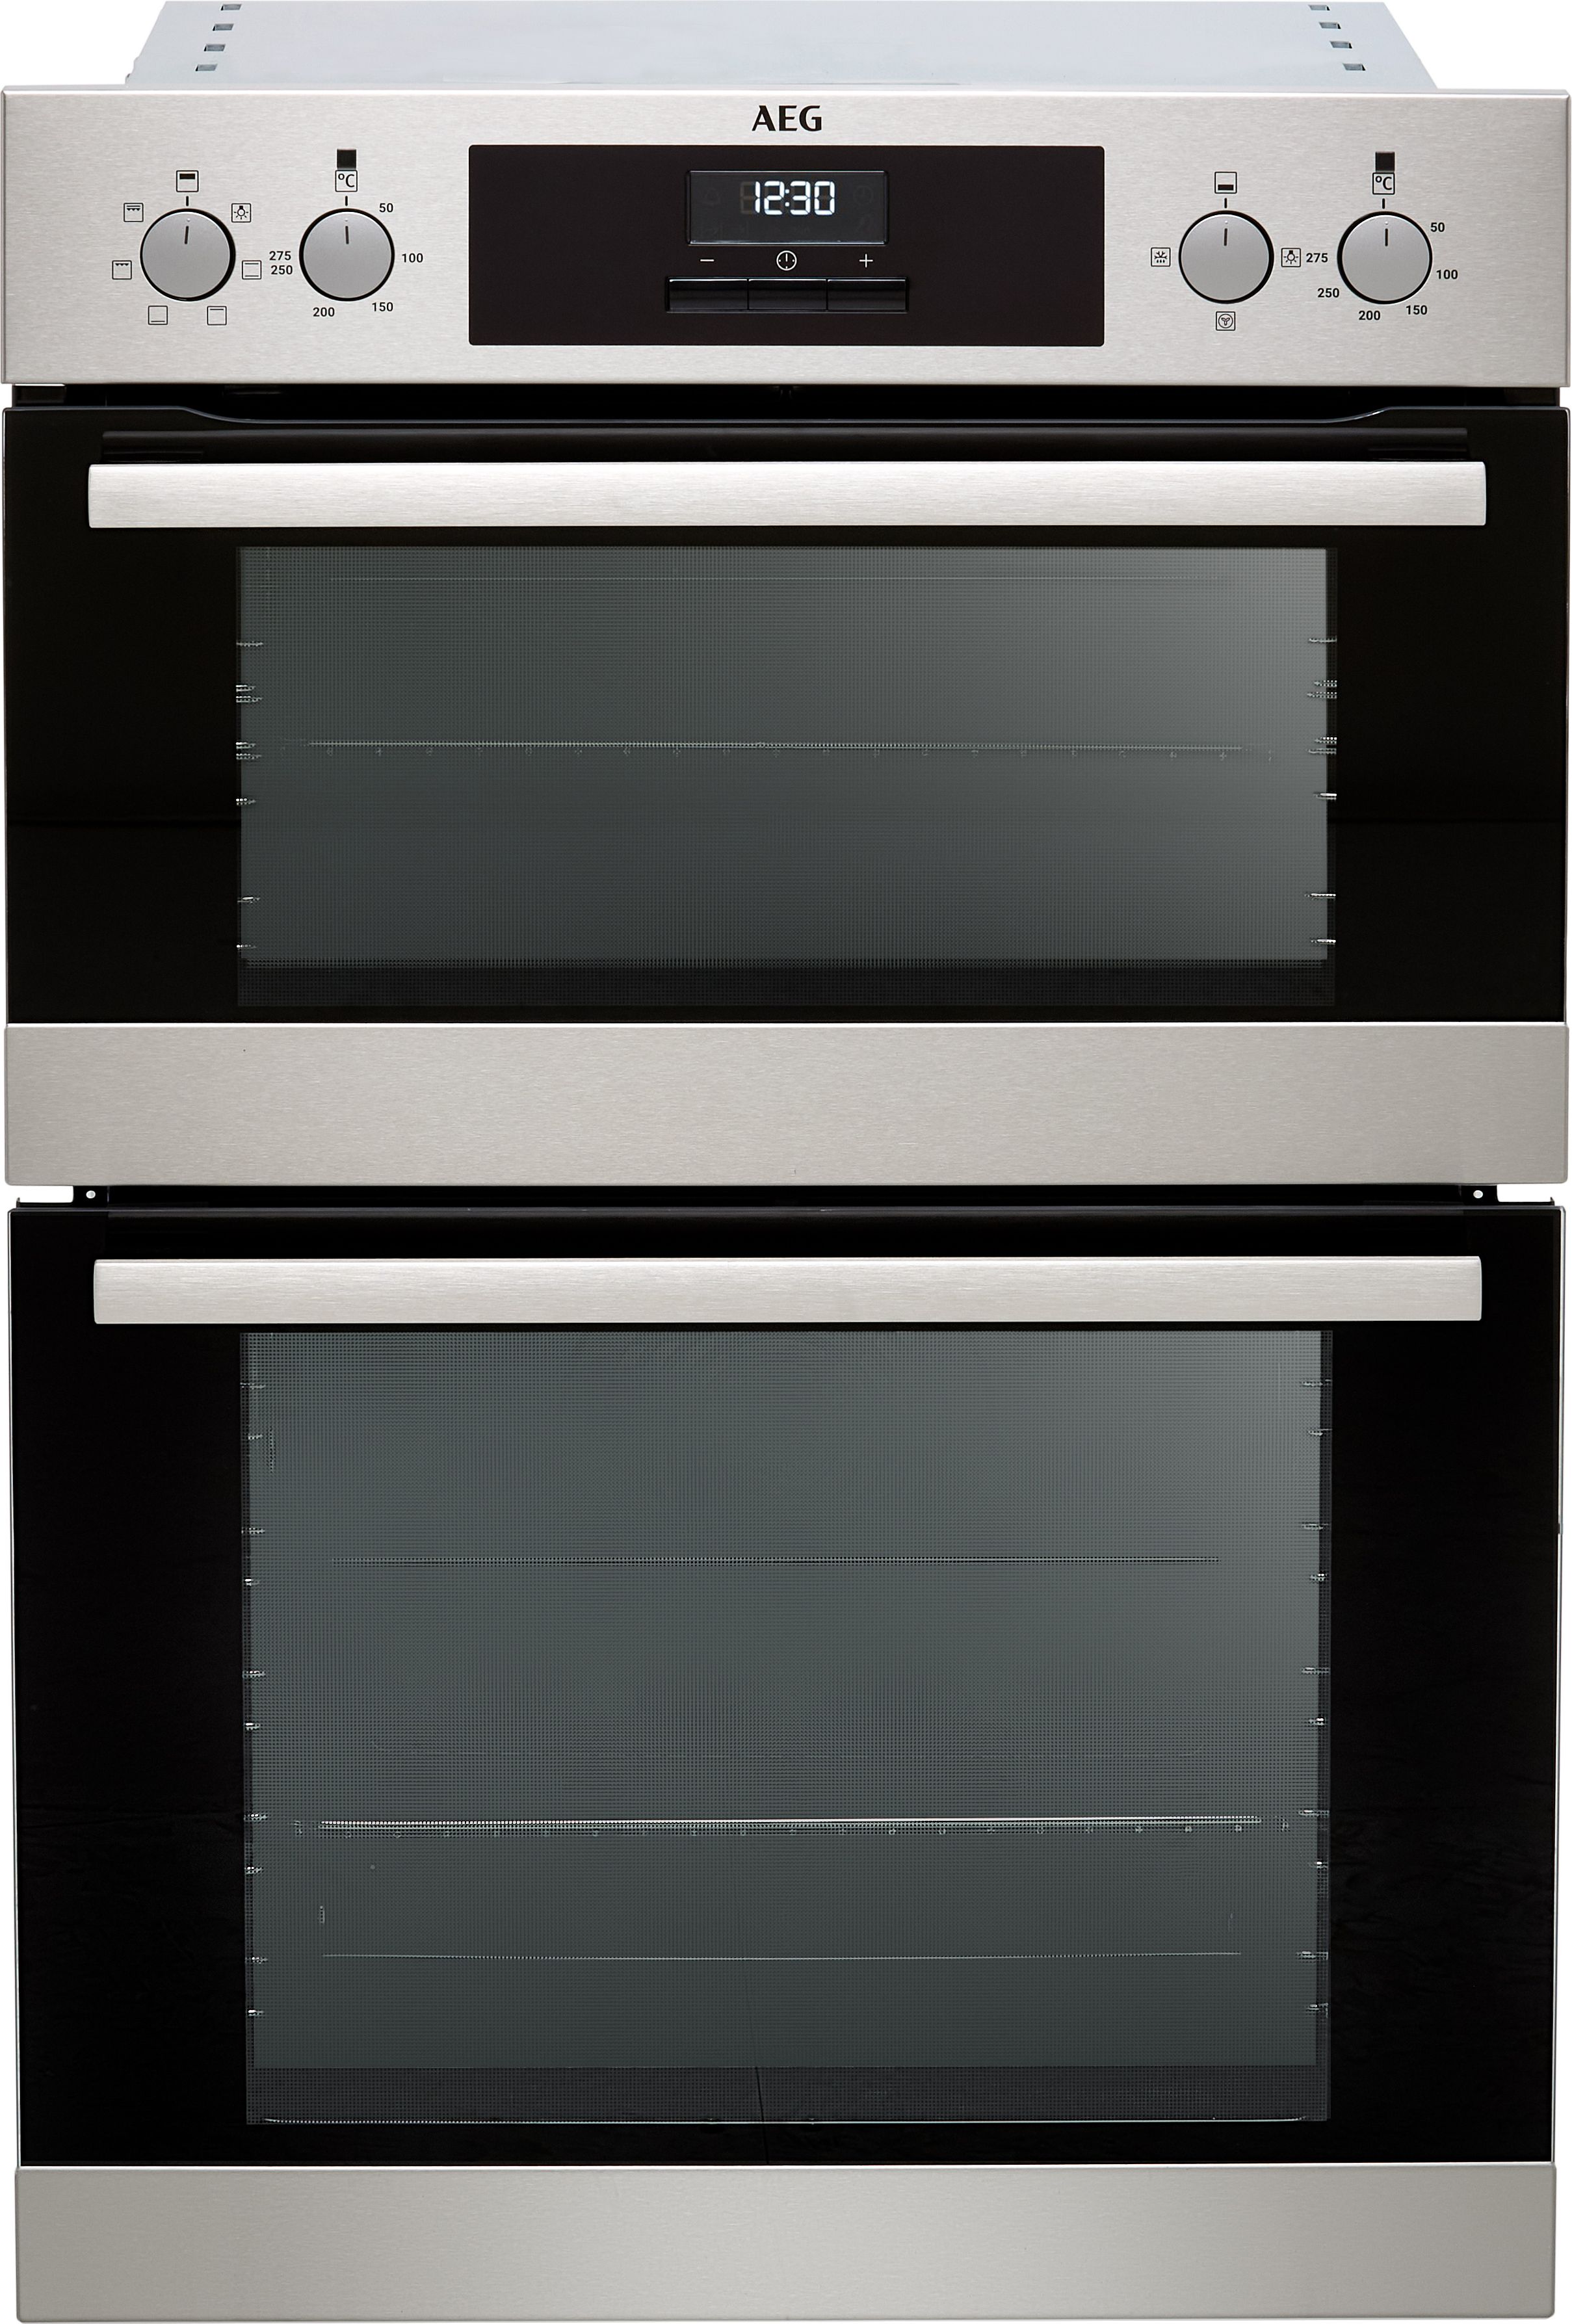 AEG DEB331010M Built In Electric Double Oven - Stainless Steel - A/A Rated, Stainless Steel